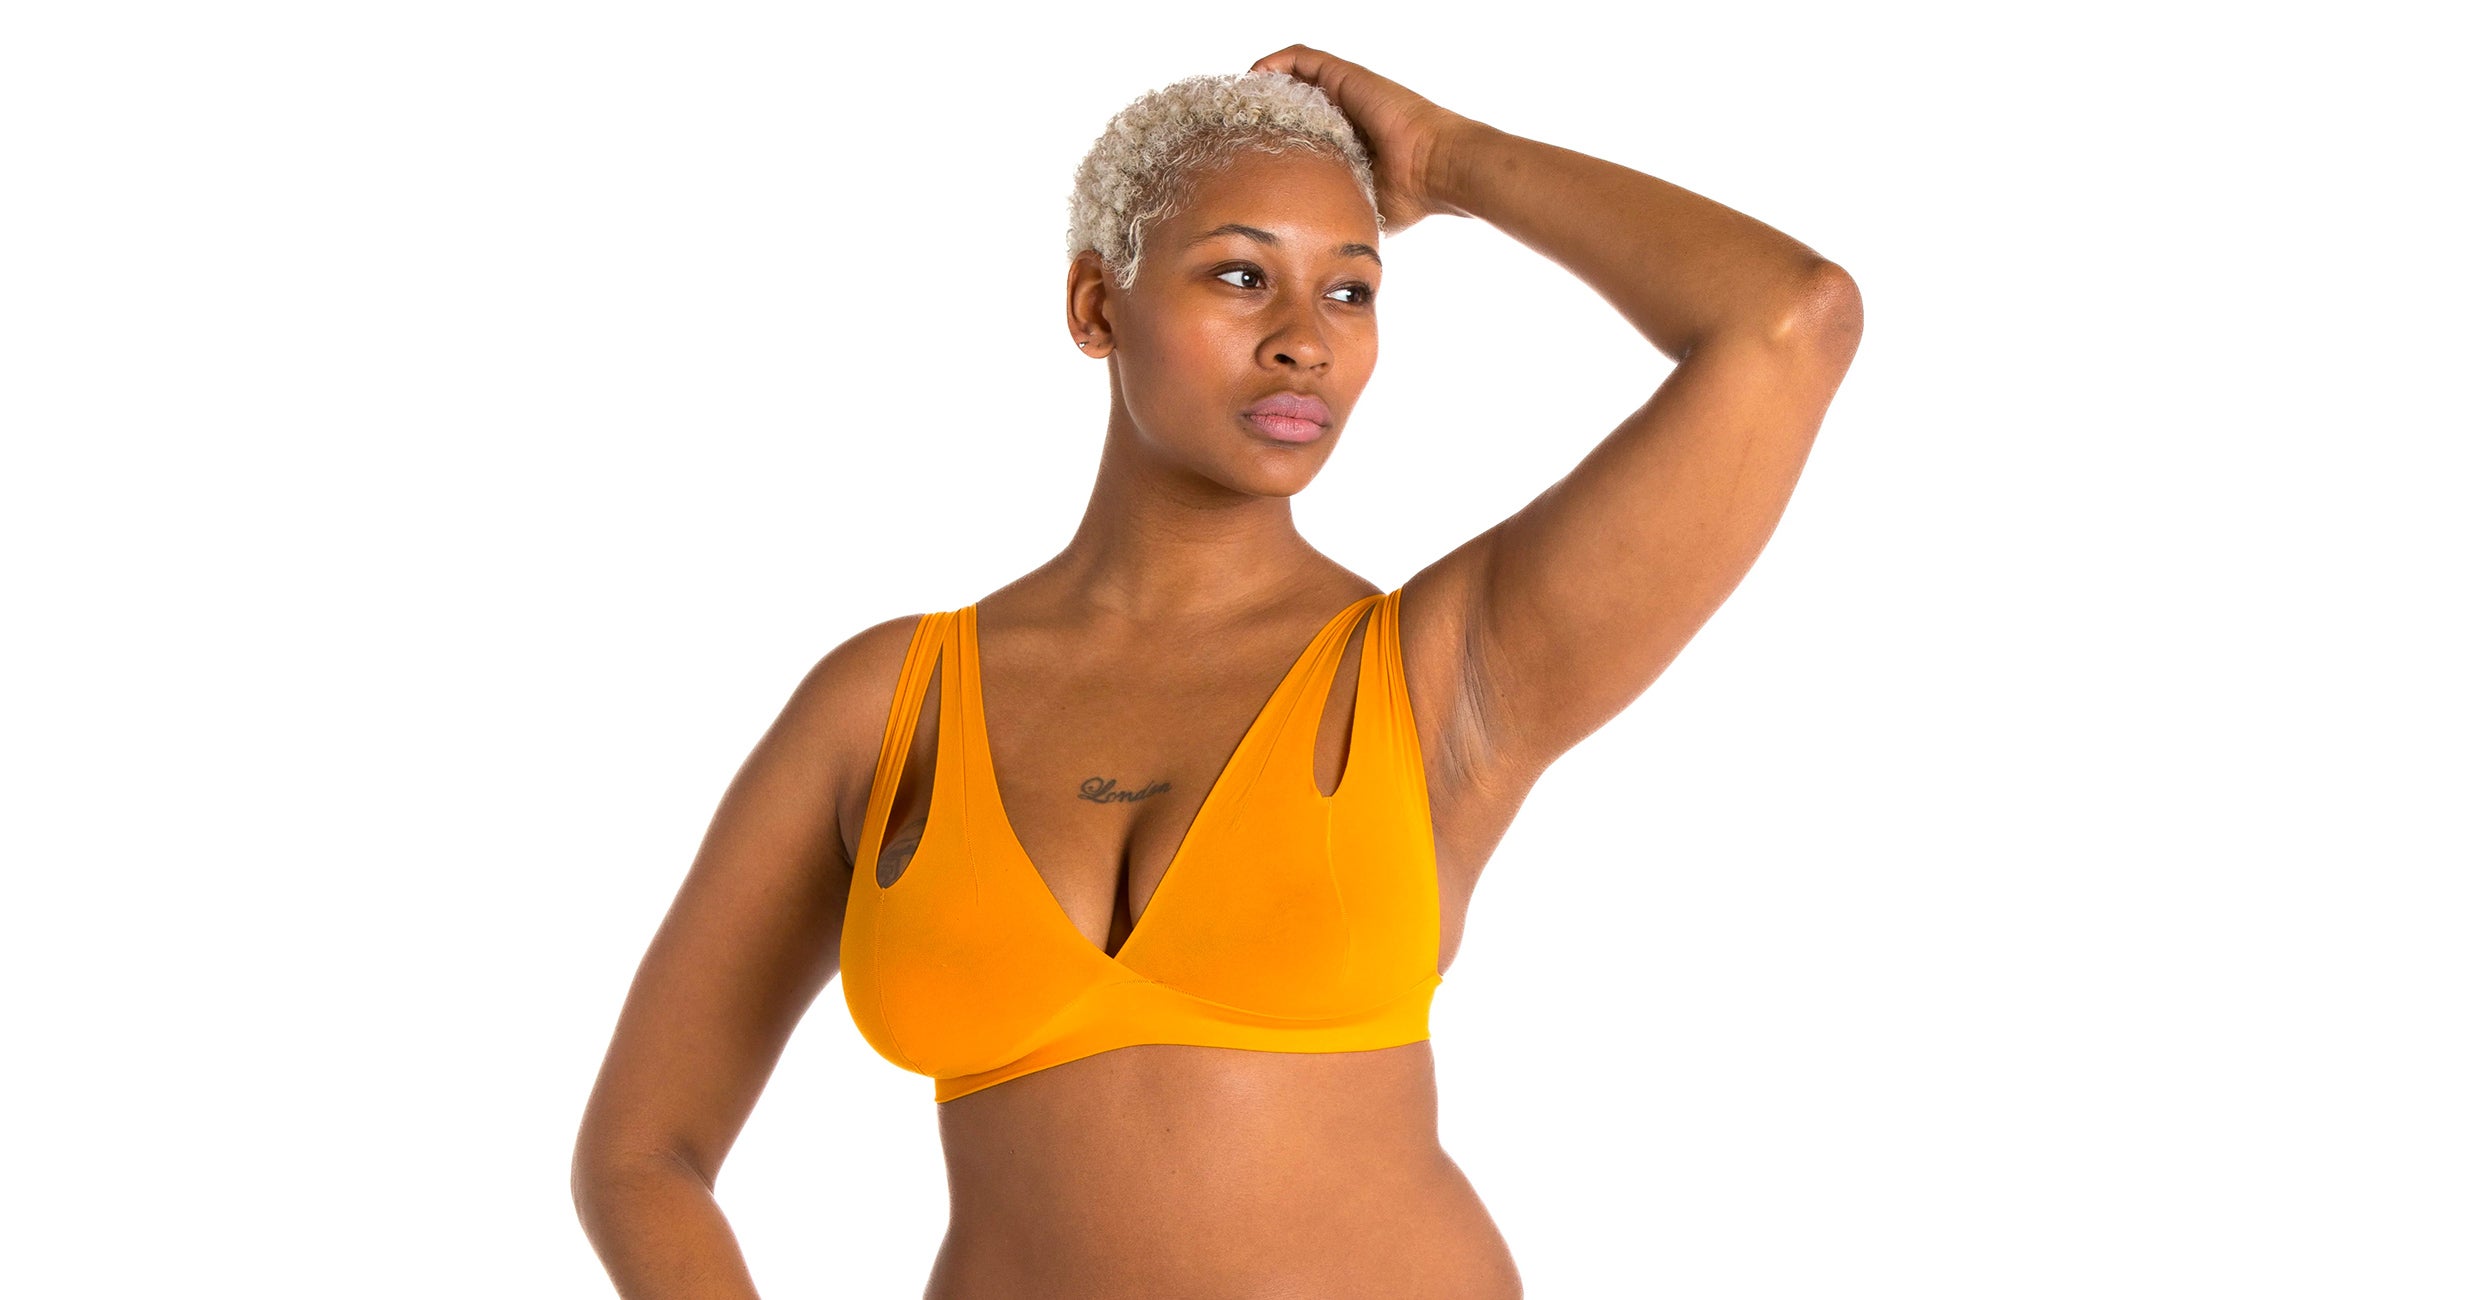 Nuudii System Barely There Boobwear Review